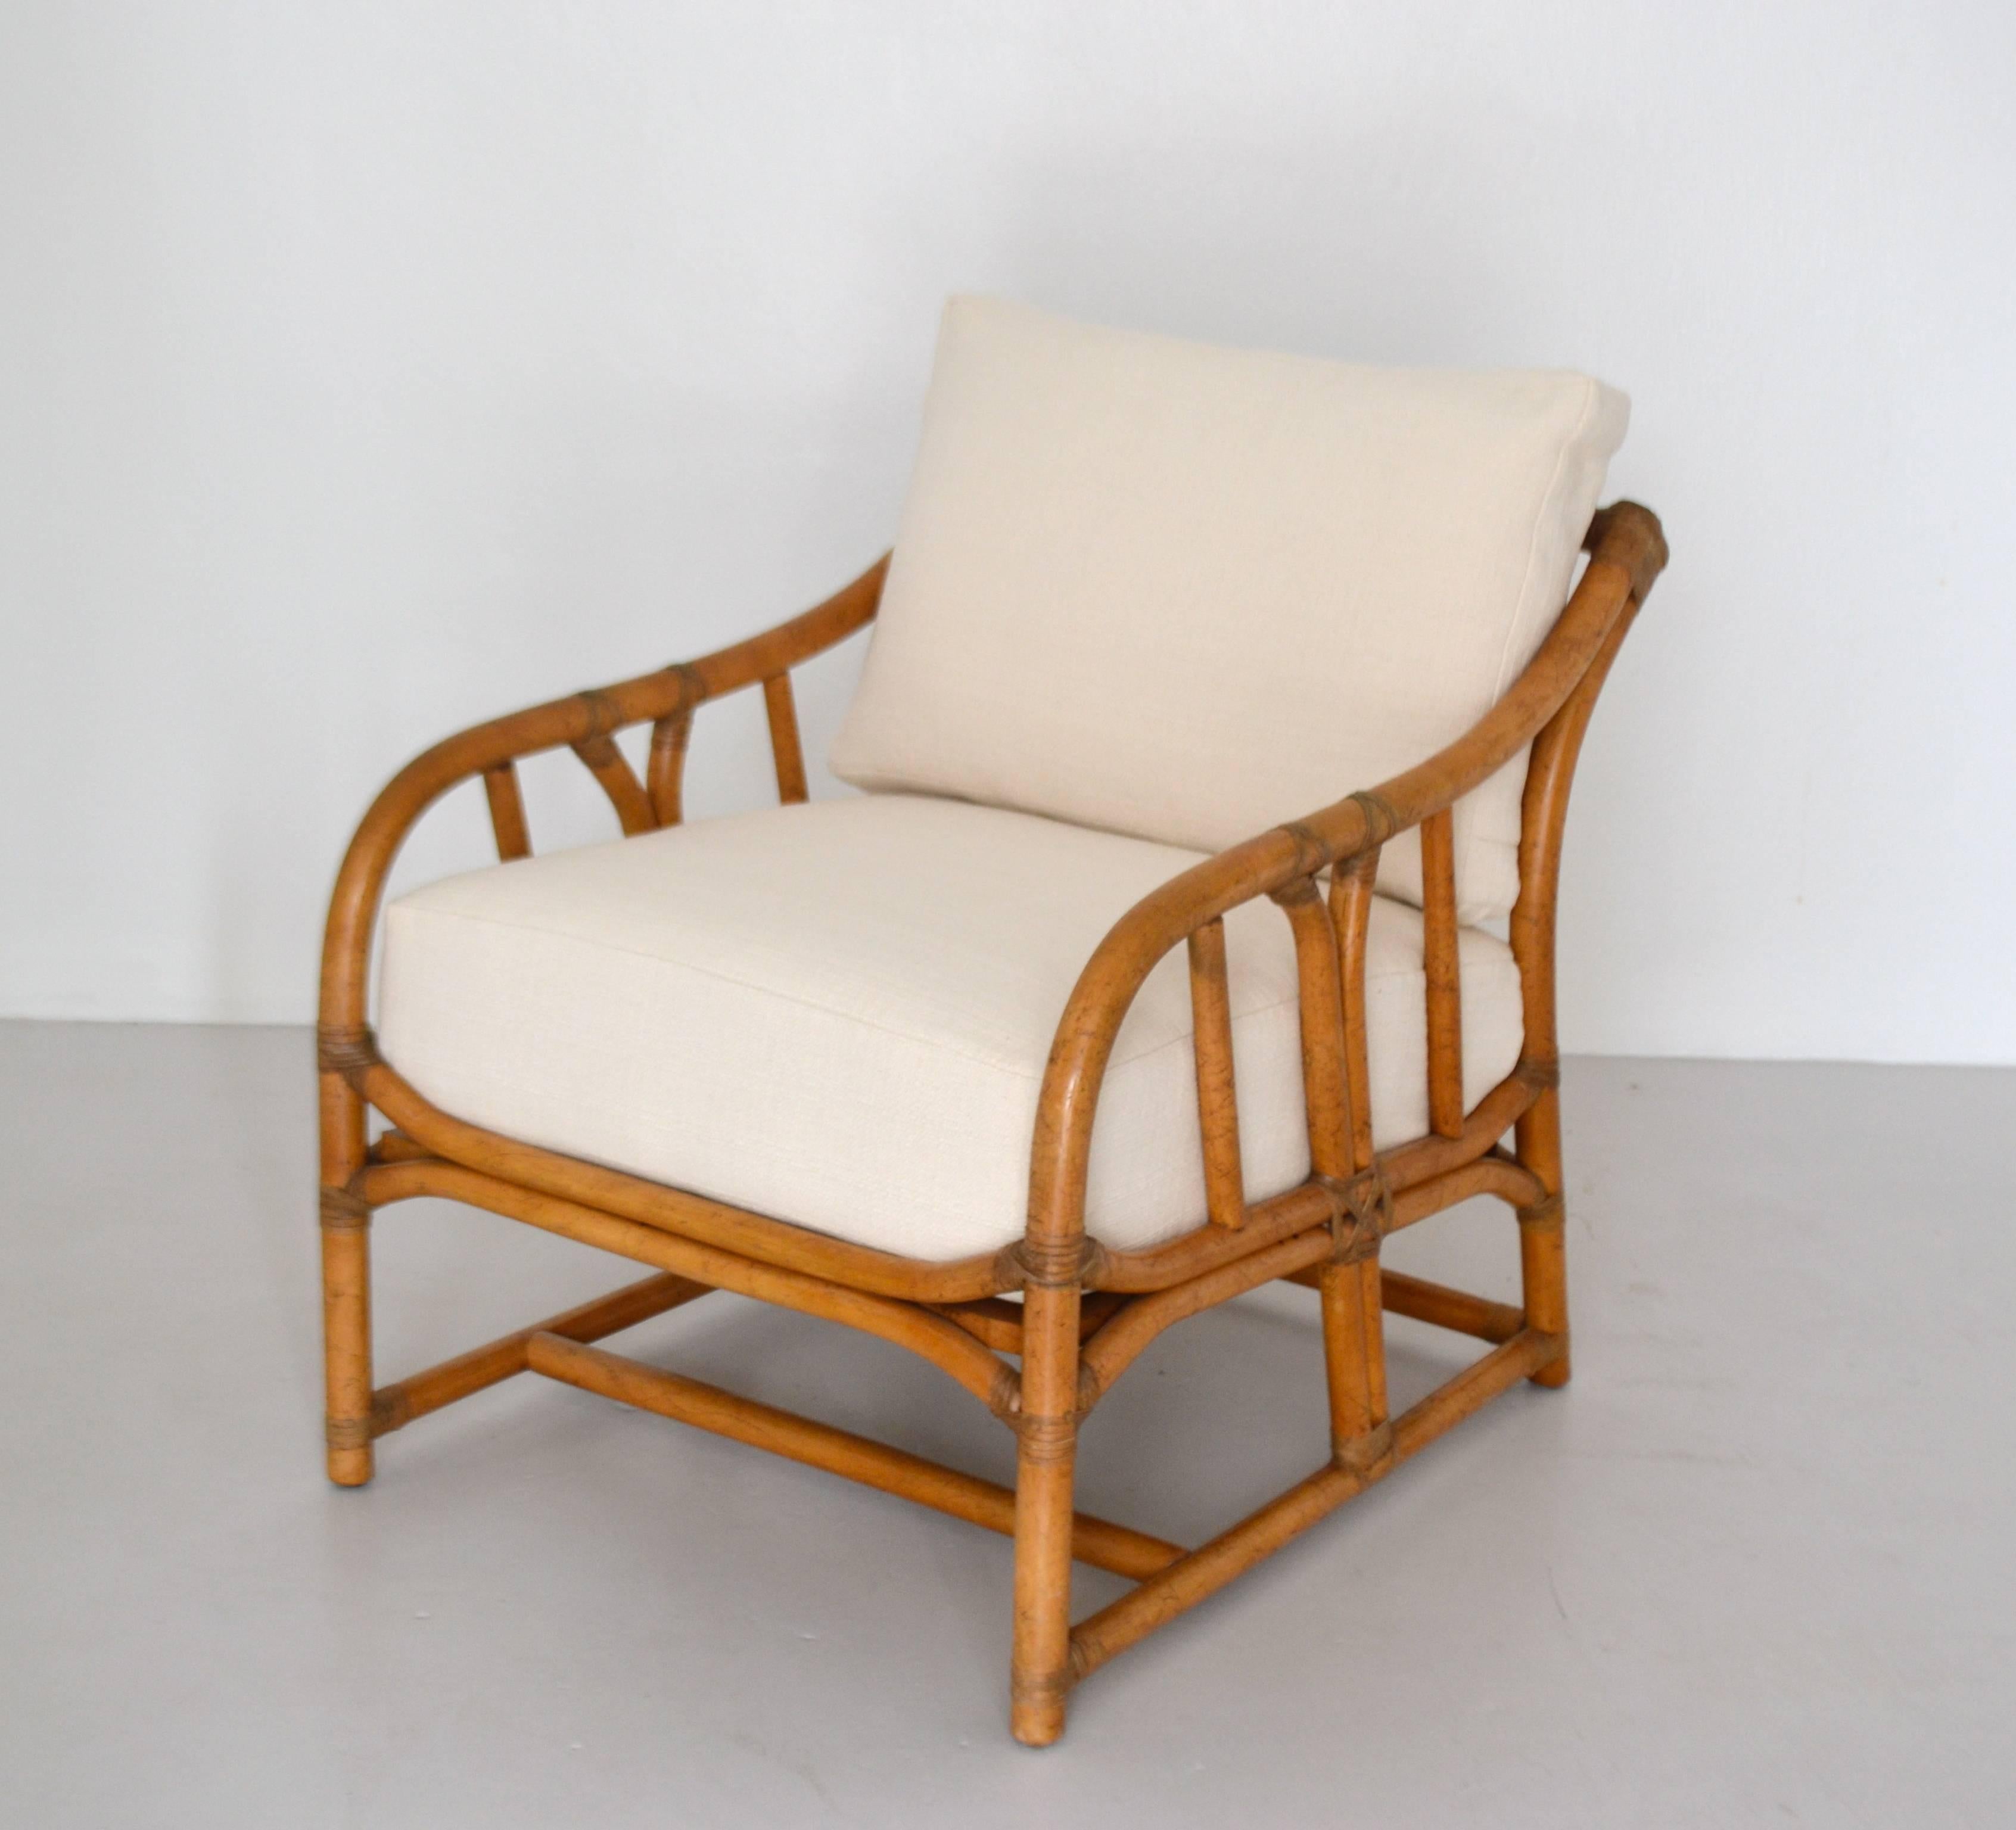 Glamorous pair of Mid-Century bamboo club chairs, circa 1960s. These striking artisan crafted lounge chairs are designed of bent bamboo with rawhide joint wrapped leather accents. These lounge chairs has been newly reupholstered in a natural woven